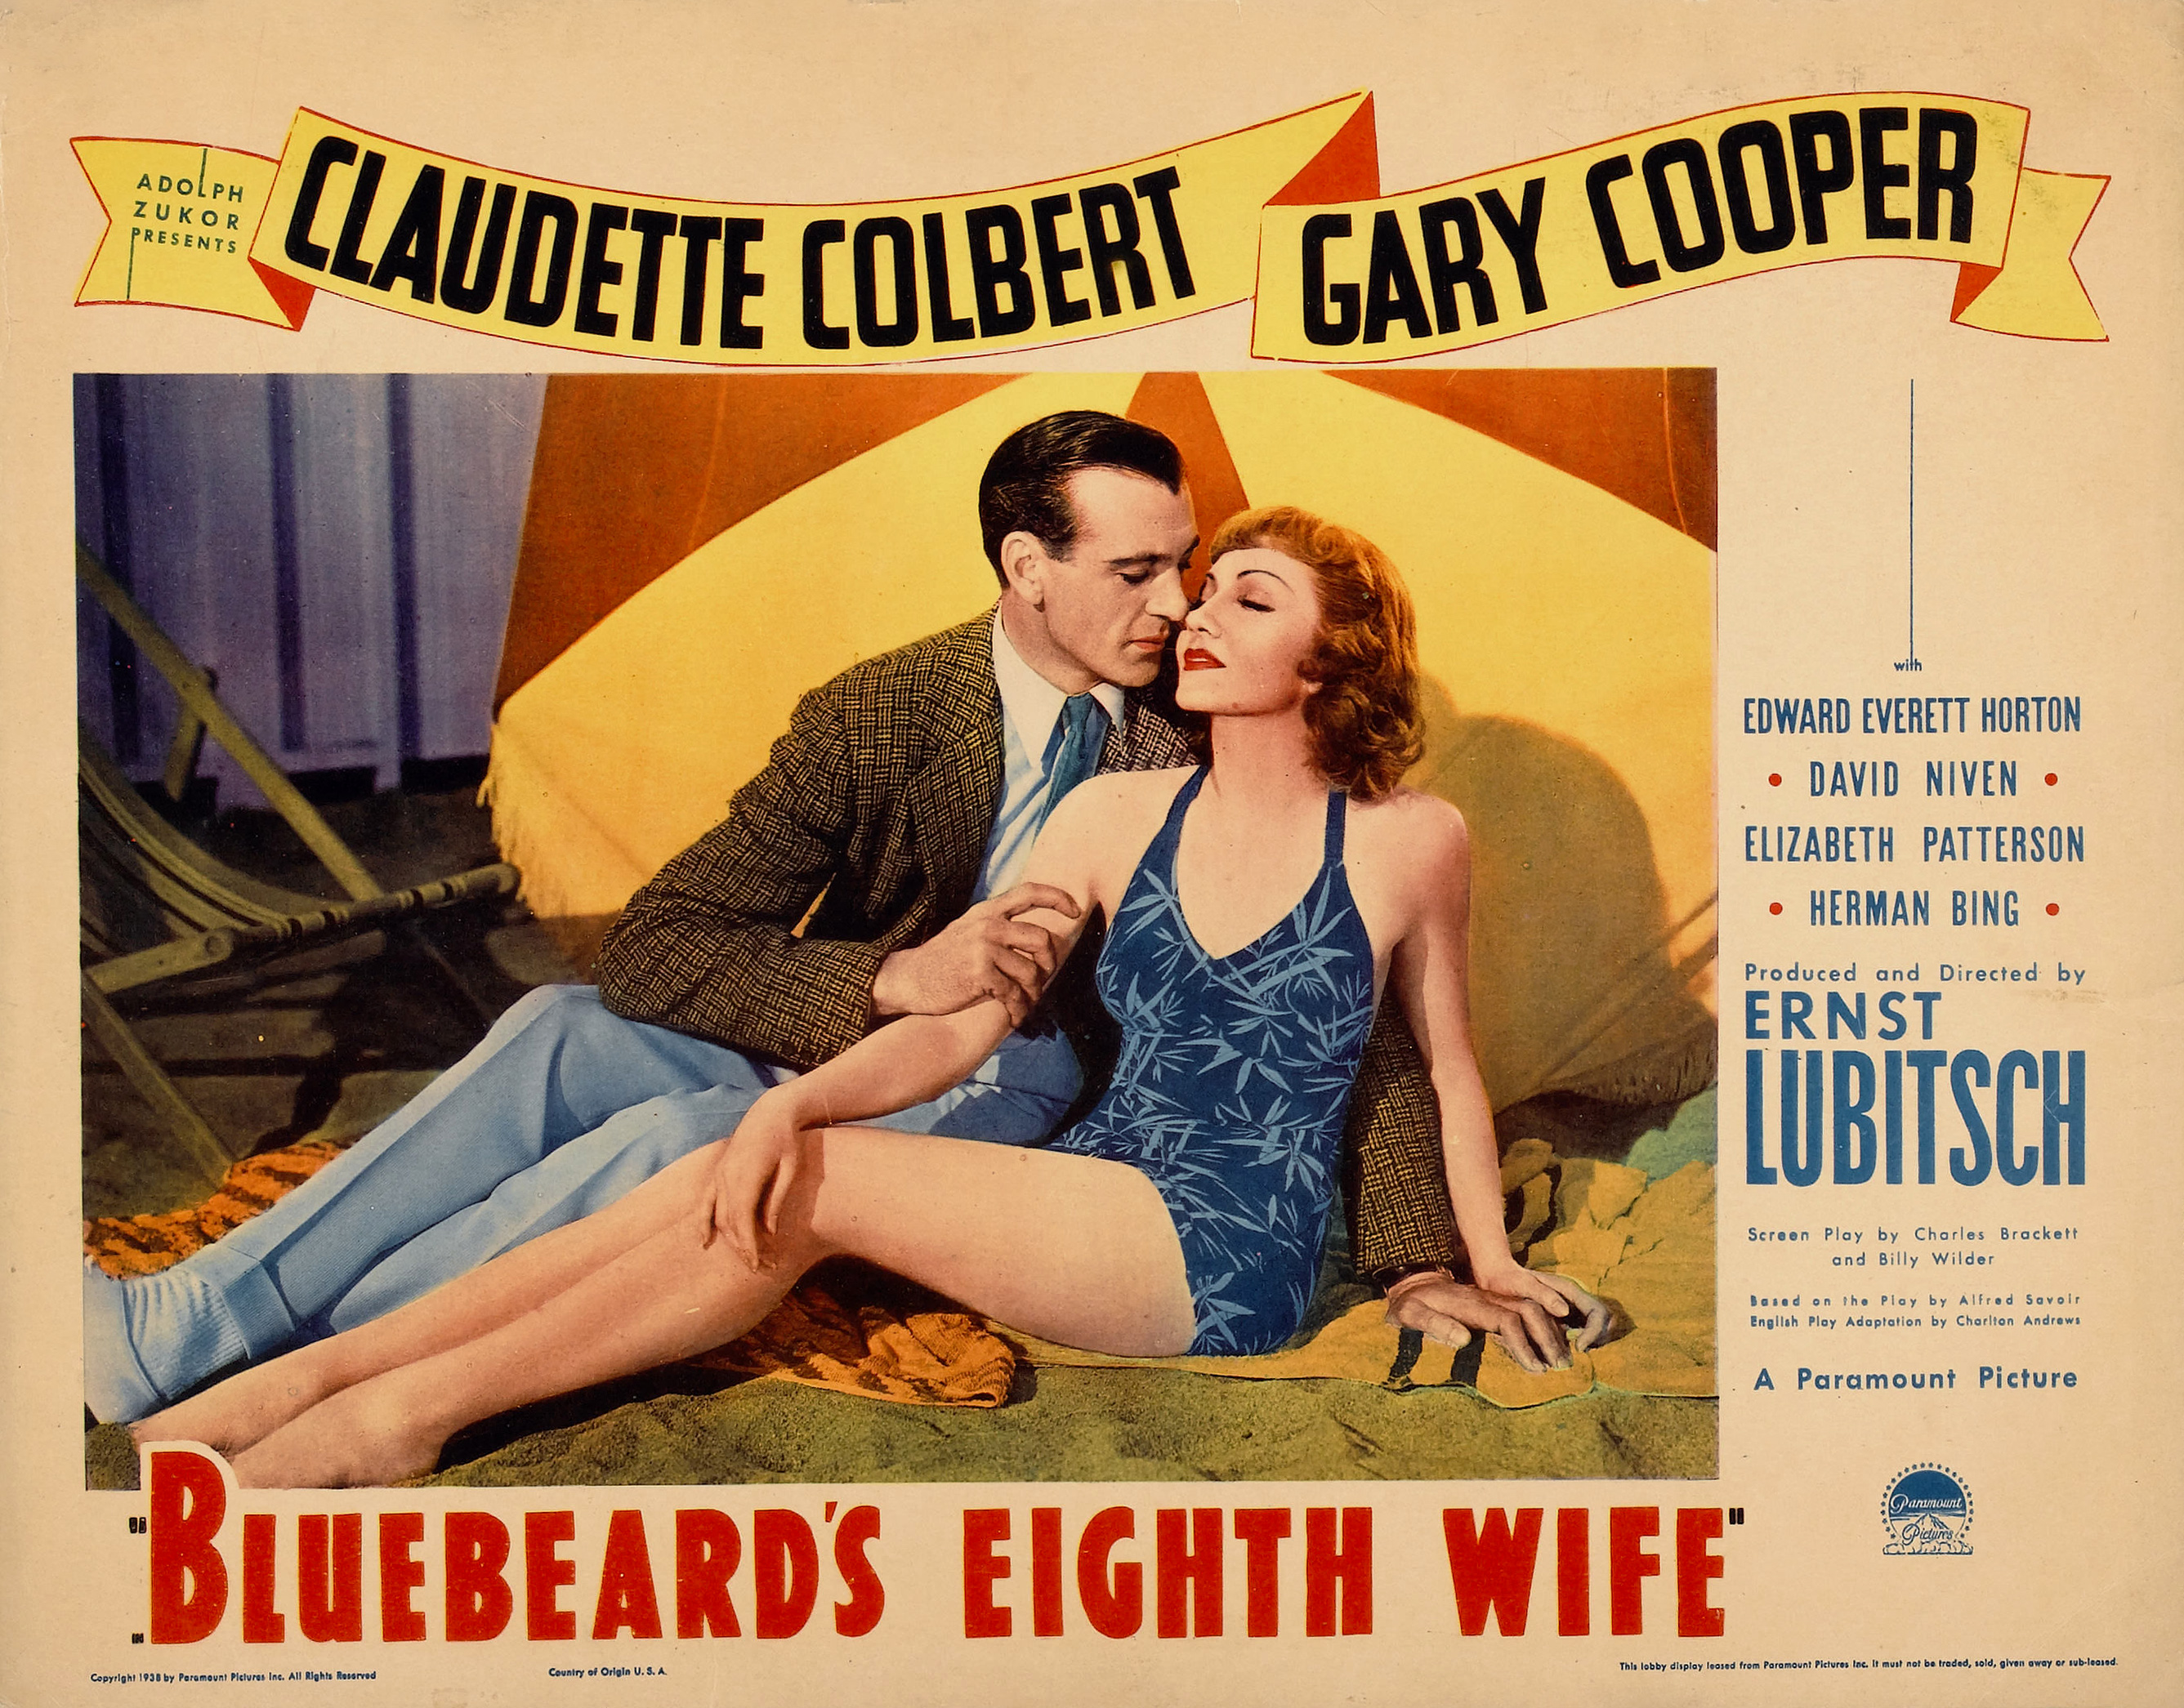 Bluebeards Eighth Wife 1938 - Overview - TCMcom